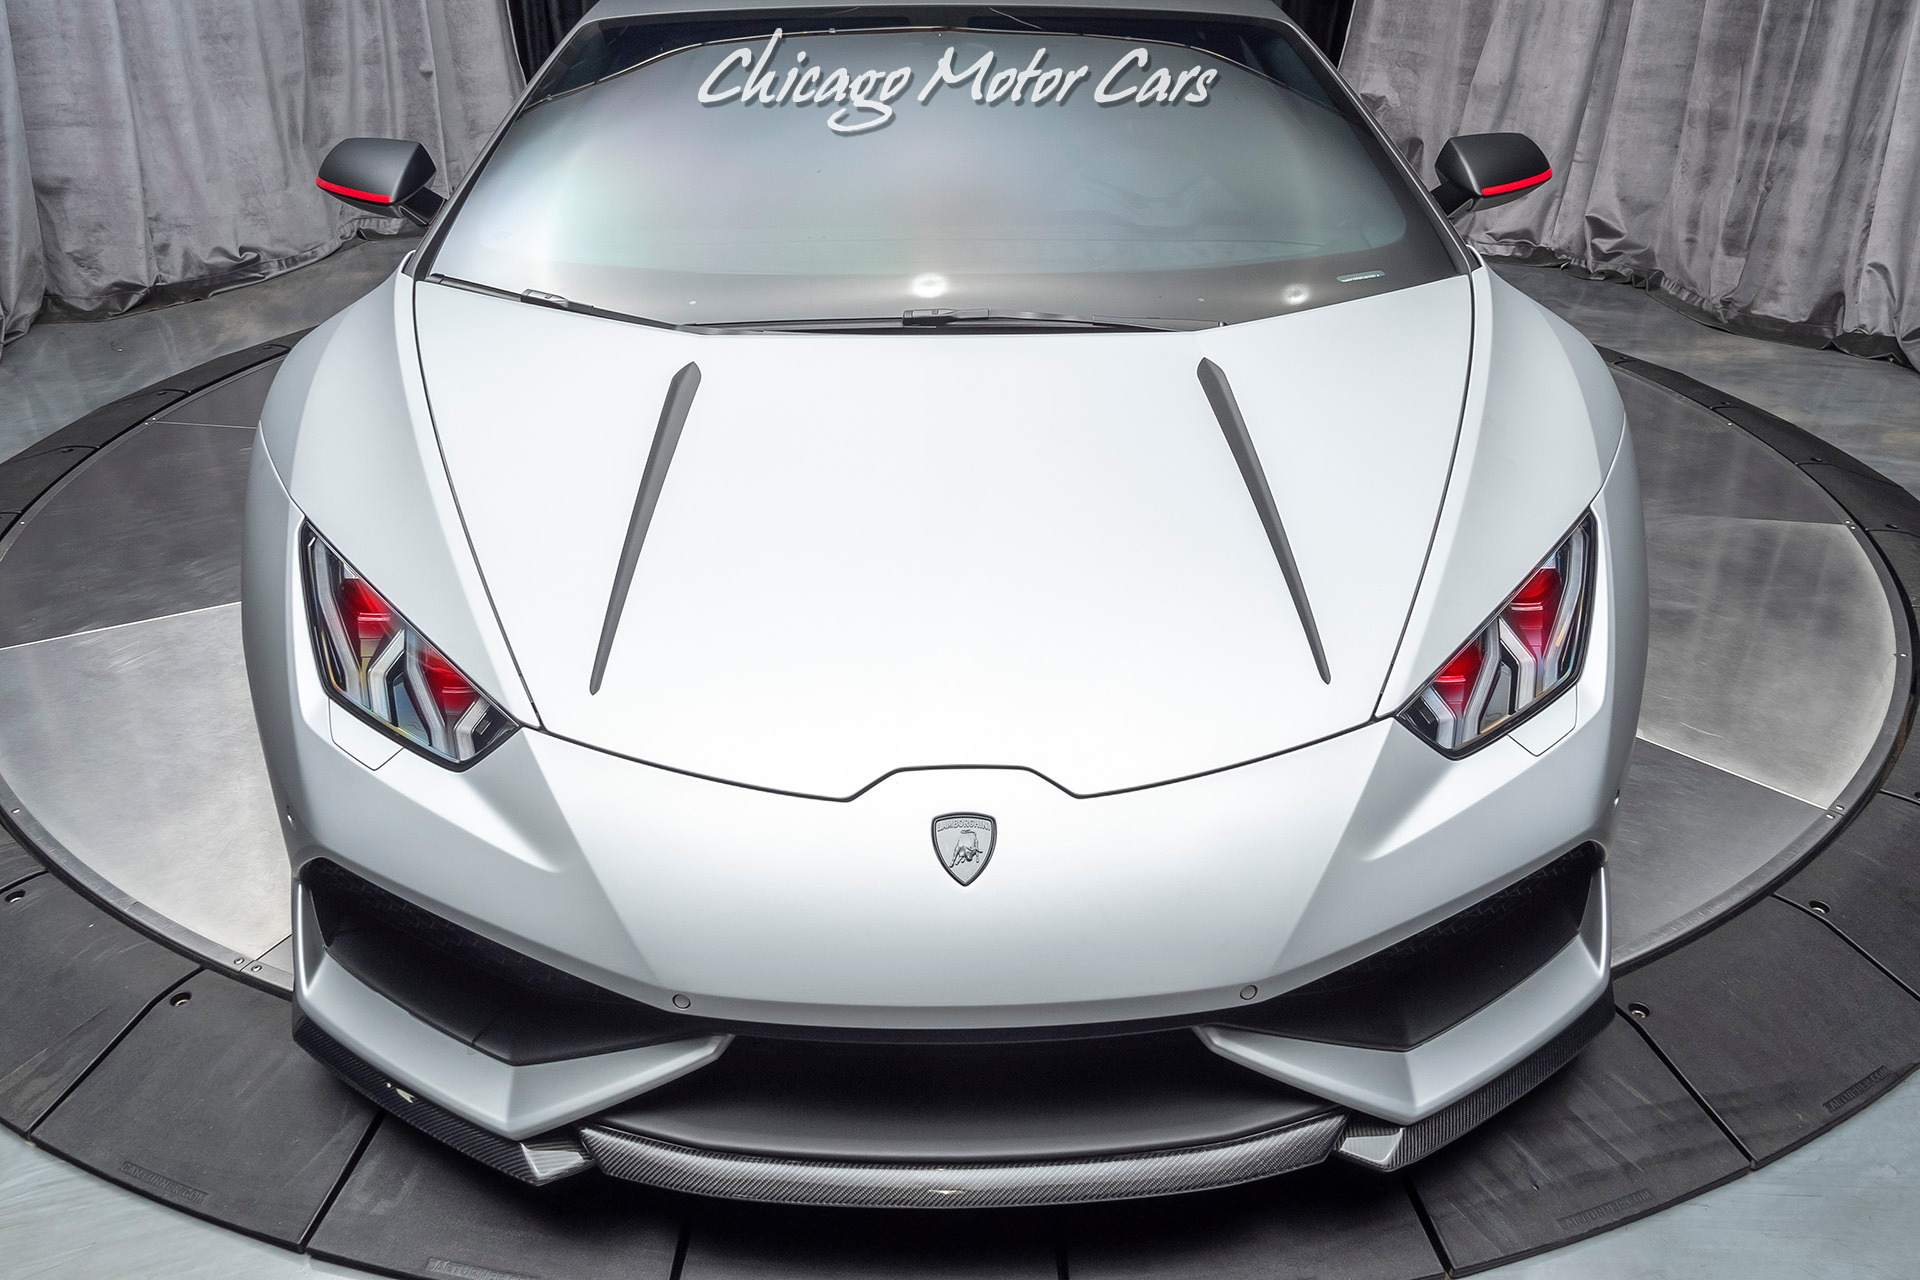 Used-2015-Lamborghini-Huracan-LP610-4-Coupe-SAVAGE-EDITION-UPGRADES-WELL-OPTIONED-SPEC